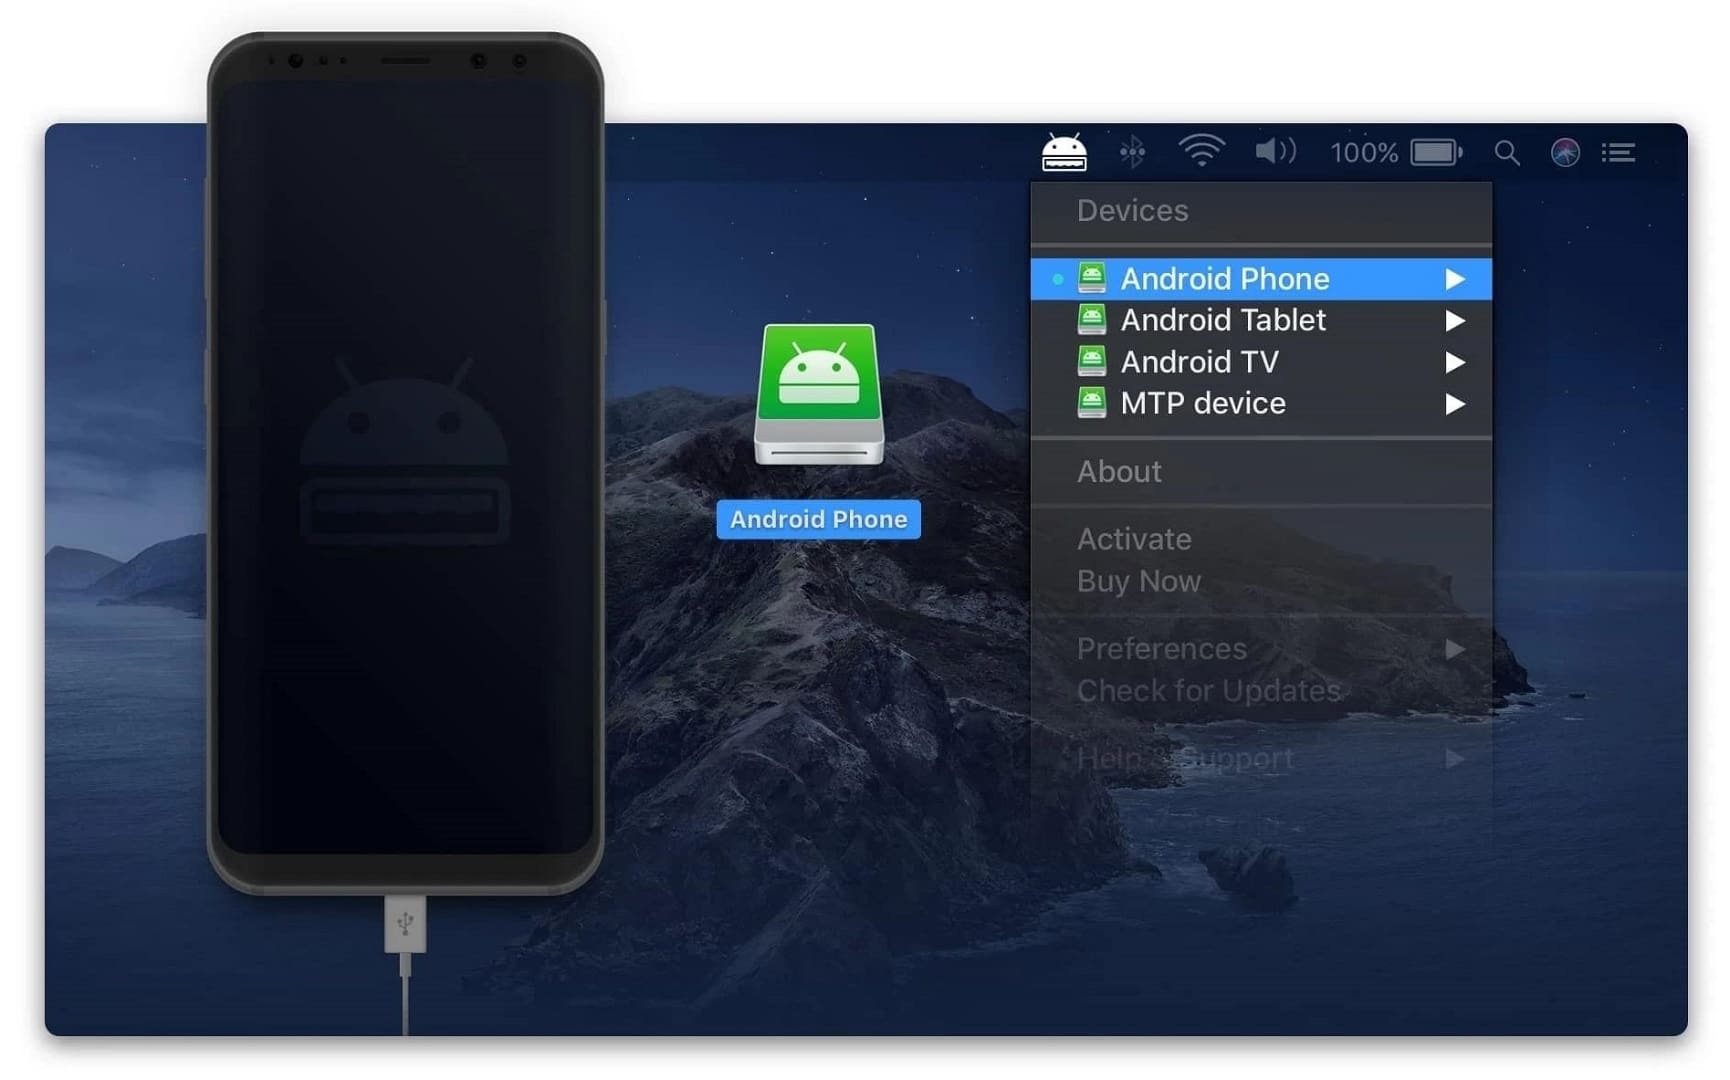 MacDroid supports all Android devices and is very easy to use.